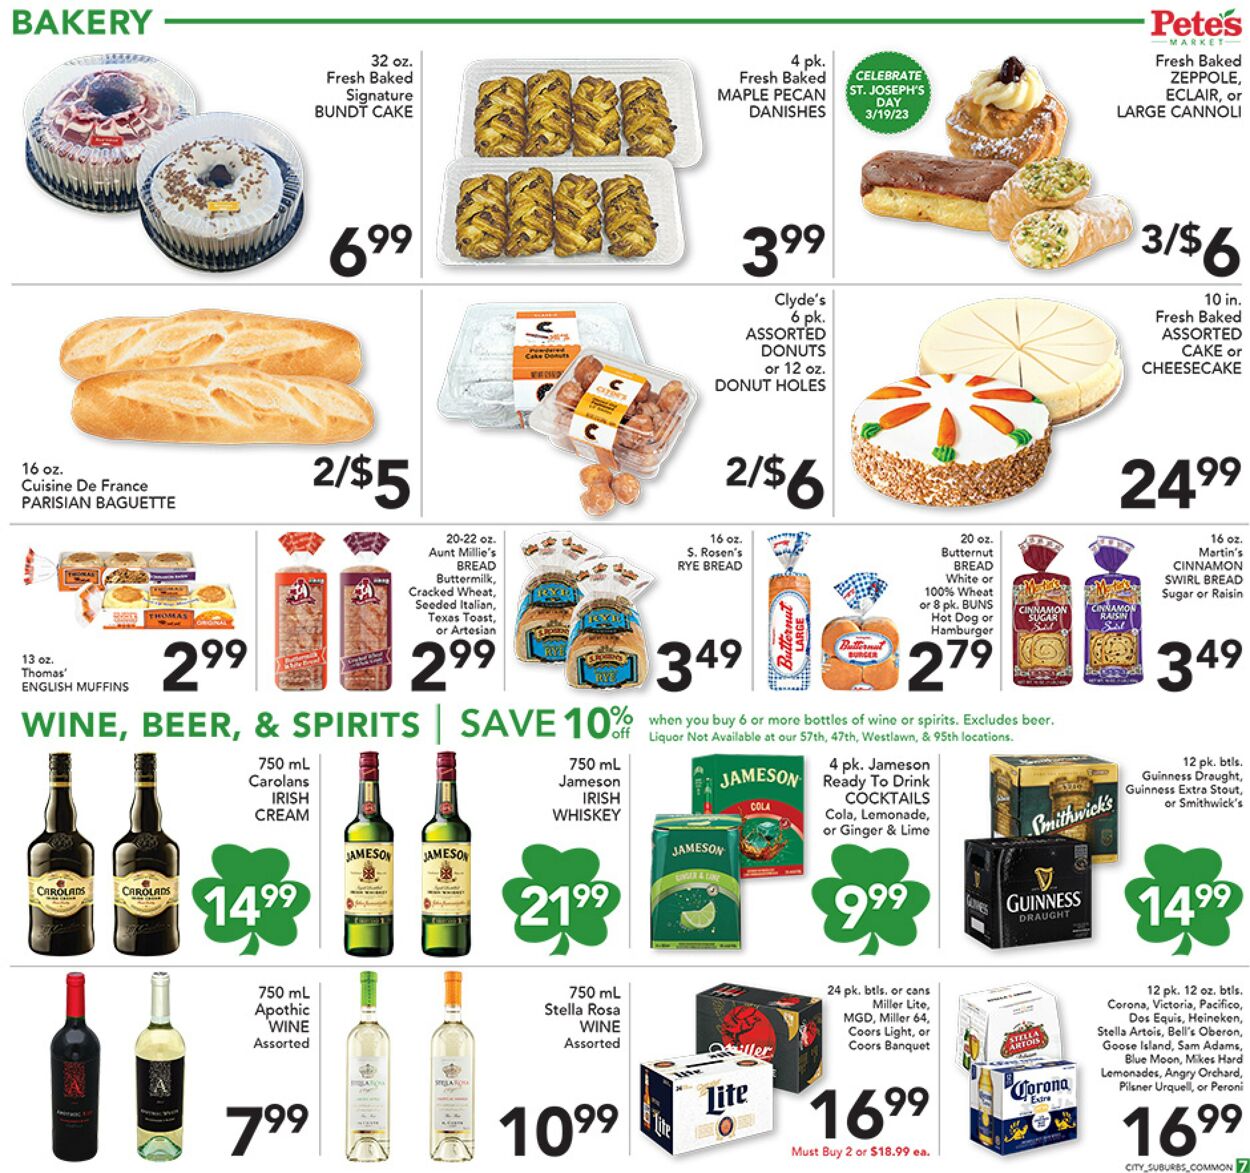 Weekly ad Pete's Fresh Market 03/15/2023 - 03/21/2023